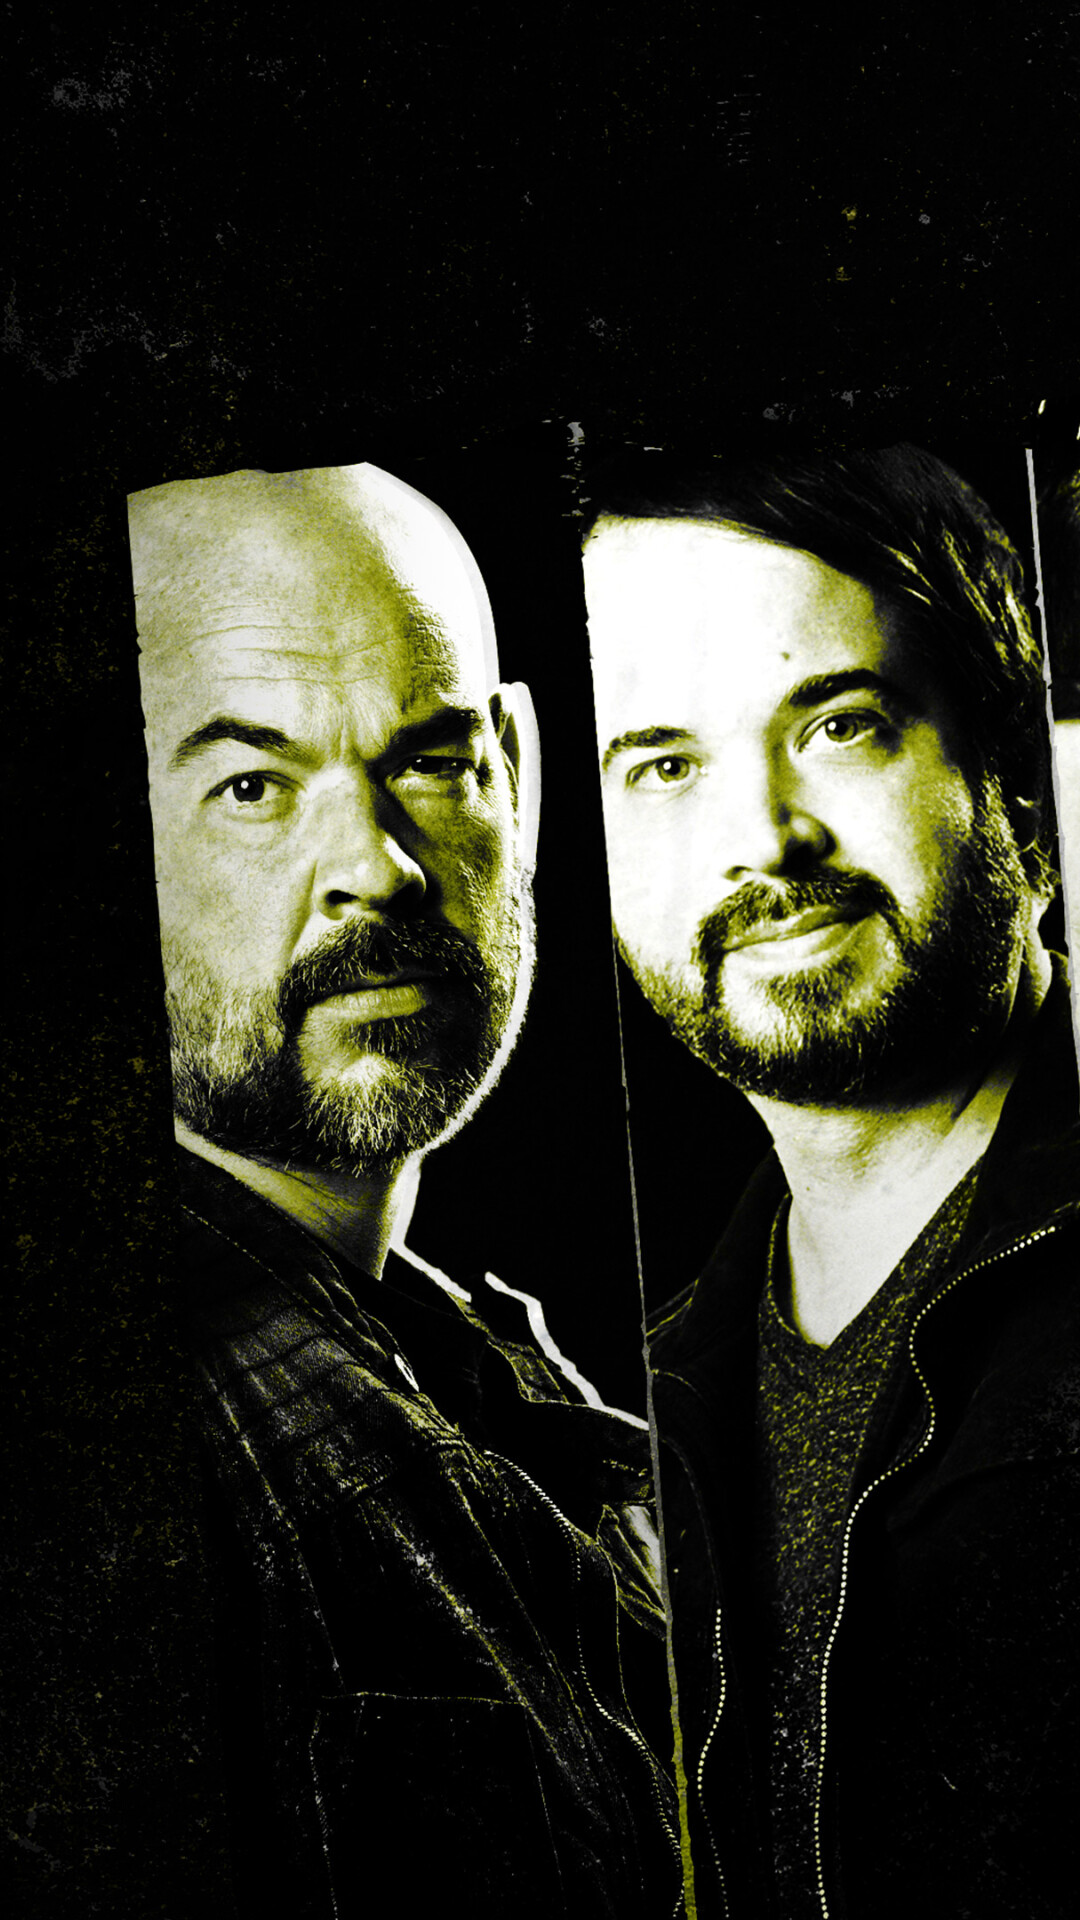 Ghost Adventures (TV Series): Aaron Goodwin, Jay Wasley, Members of the Zak Bagans' crew, Professional paranormal hunters. 1080x1920 Full HD Background.